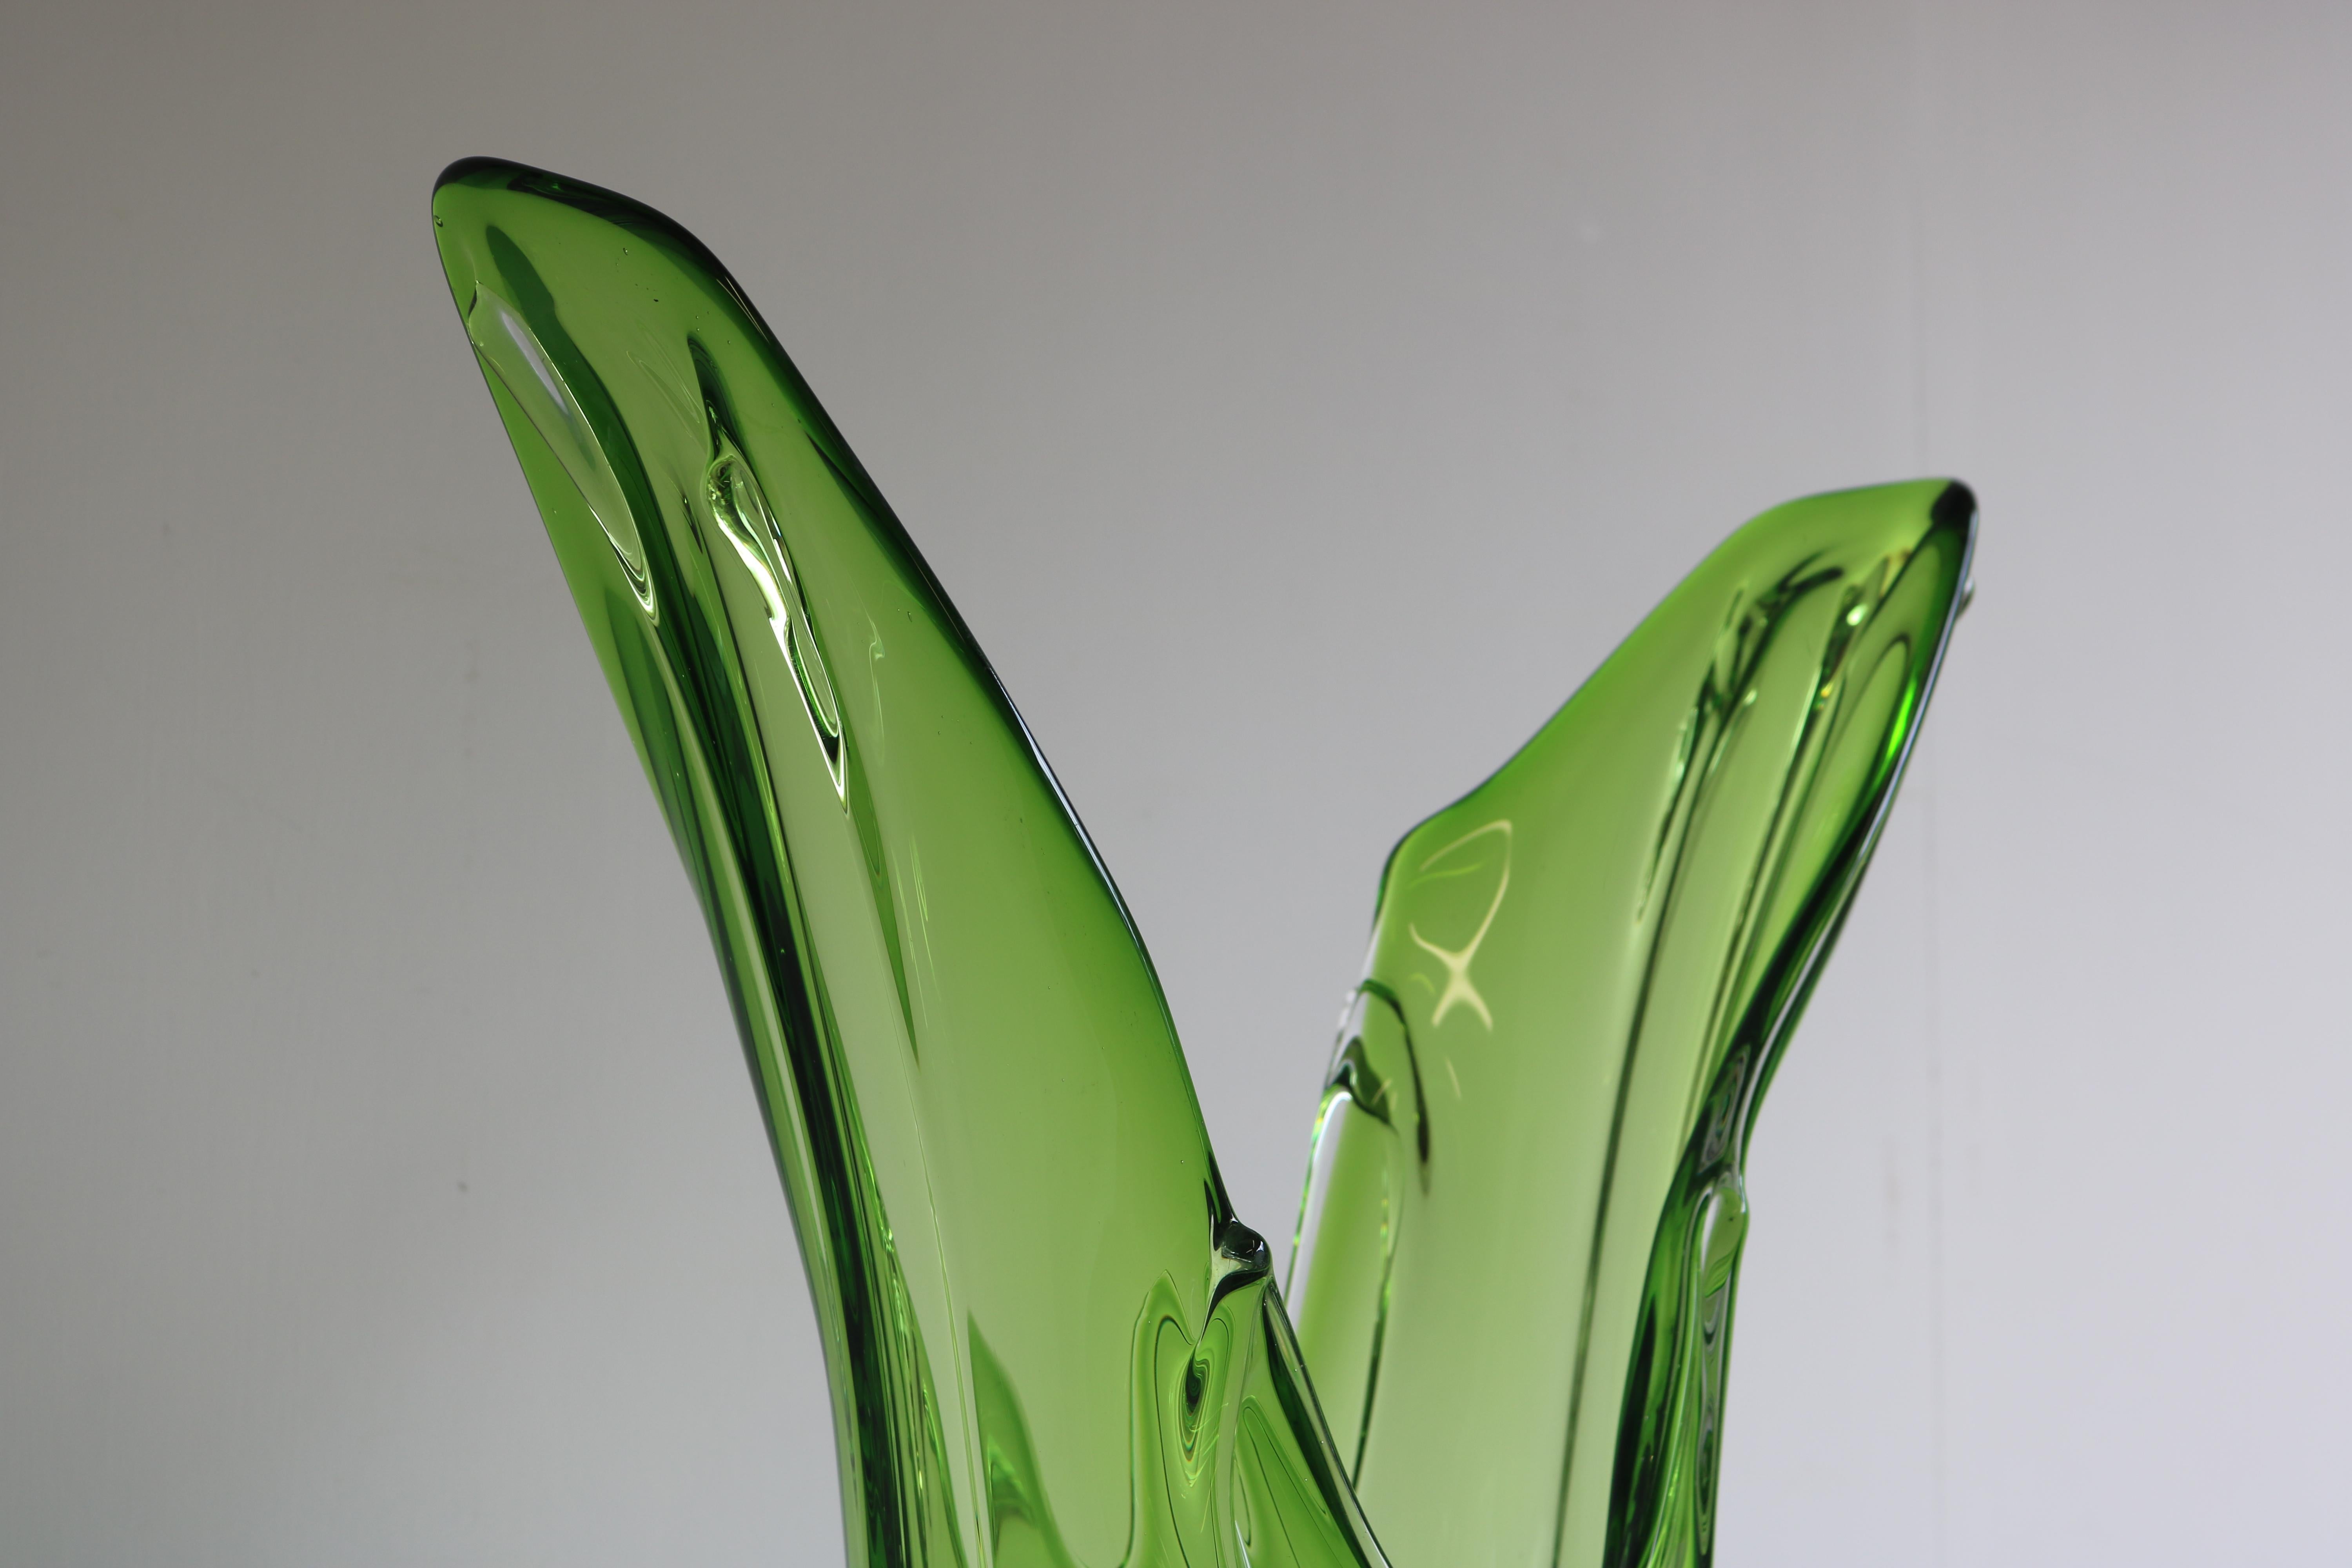 Large 5.4kg Italian Murano Glass vase Attr. Fratelli Toso 1950 Green Sommerso  For Sale 4